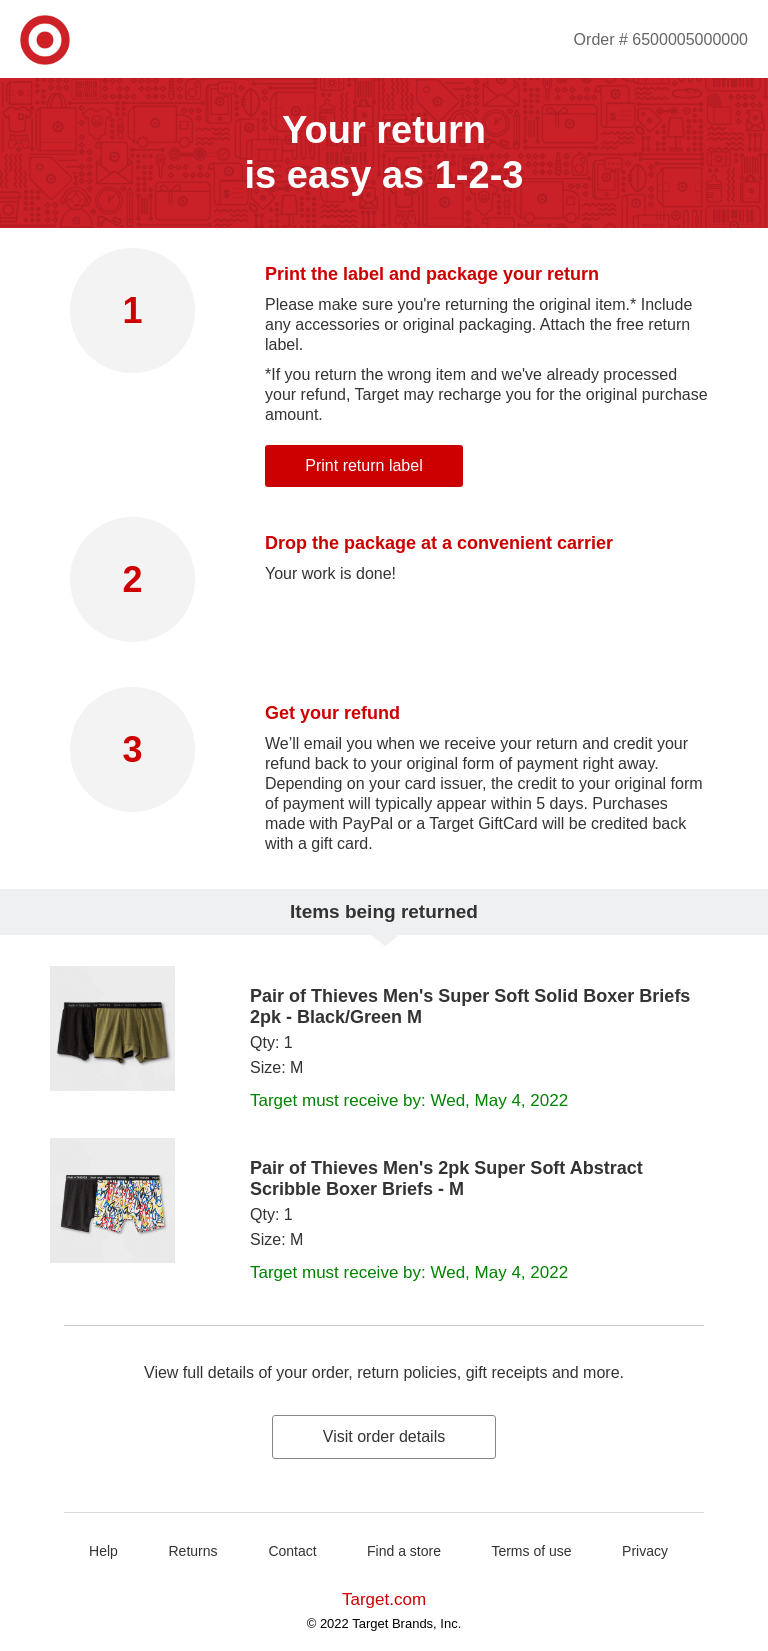 transactional email from Target